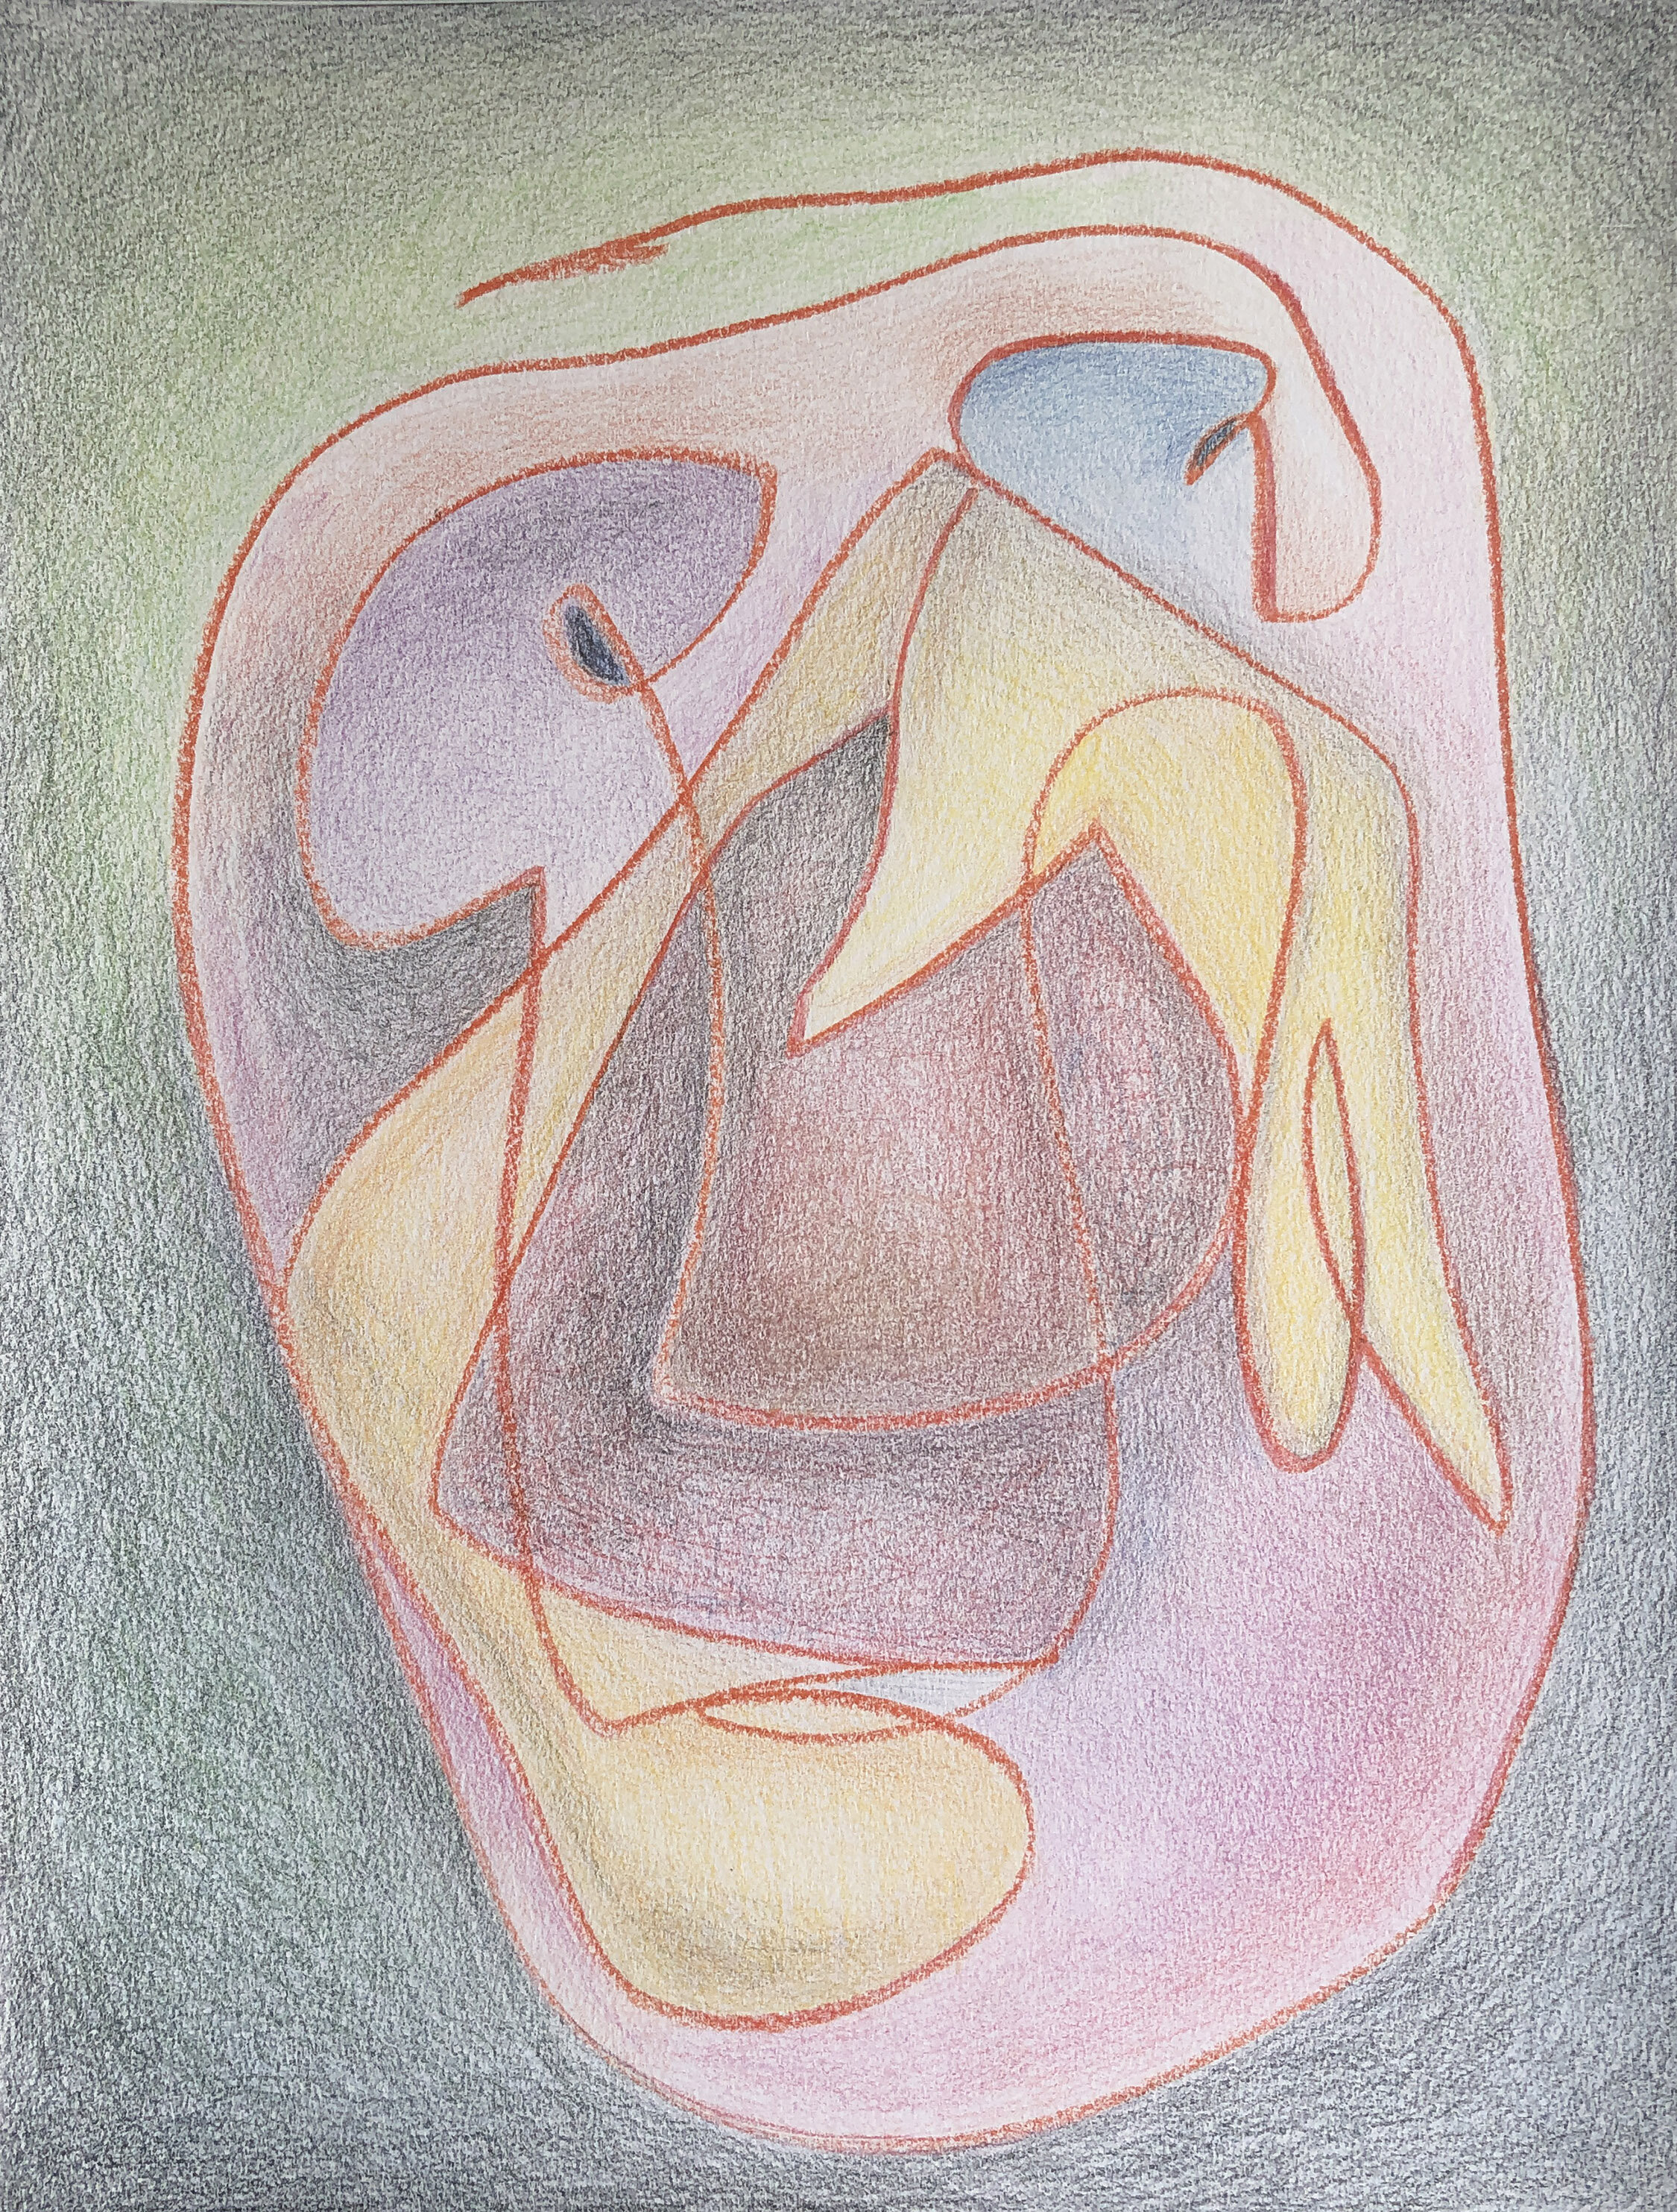 Awkward Grip  9" x12" Colored Pencil on Paper